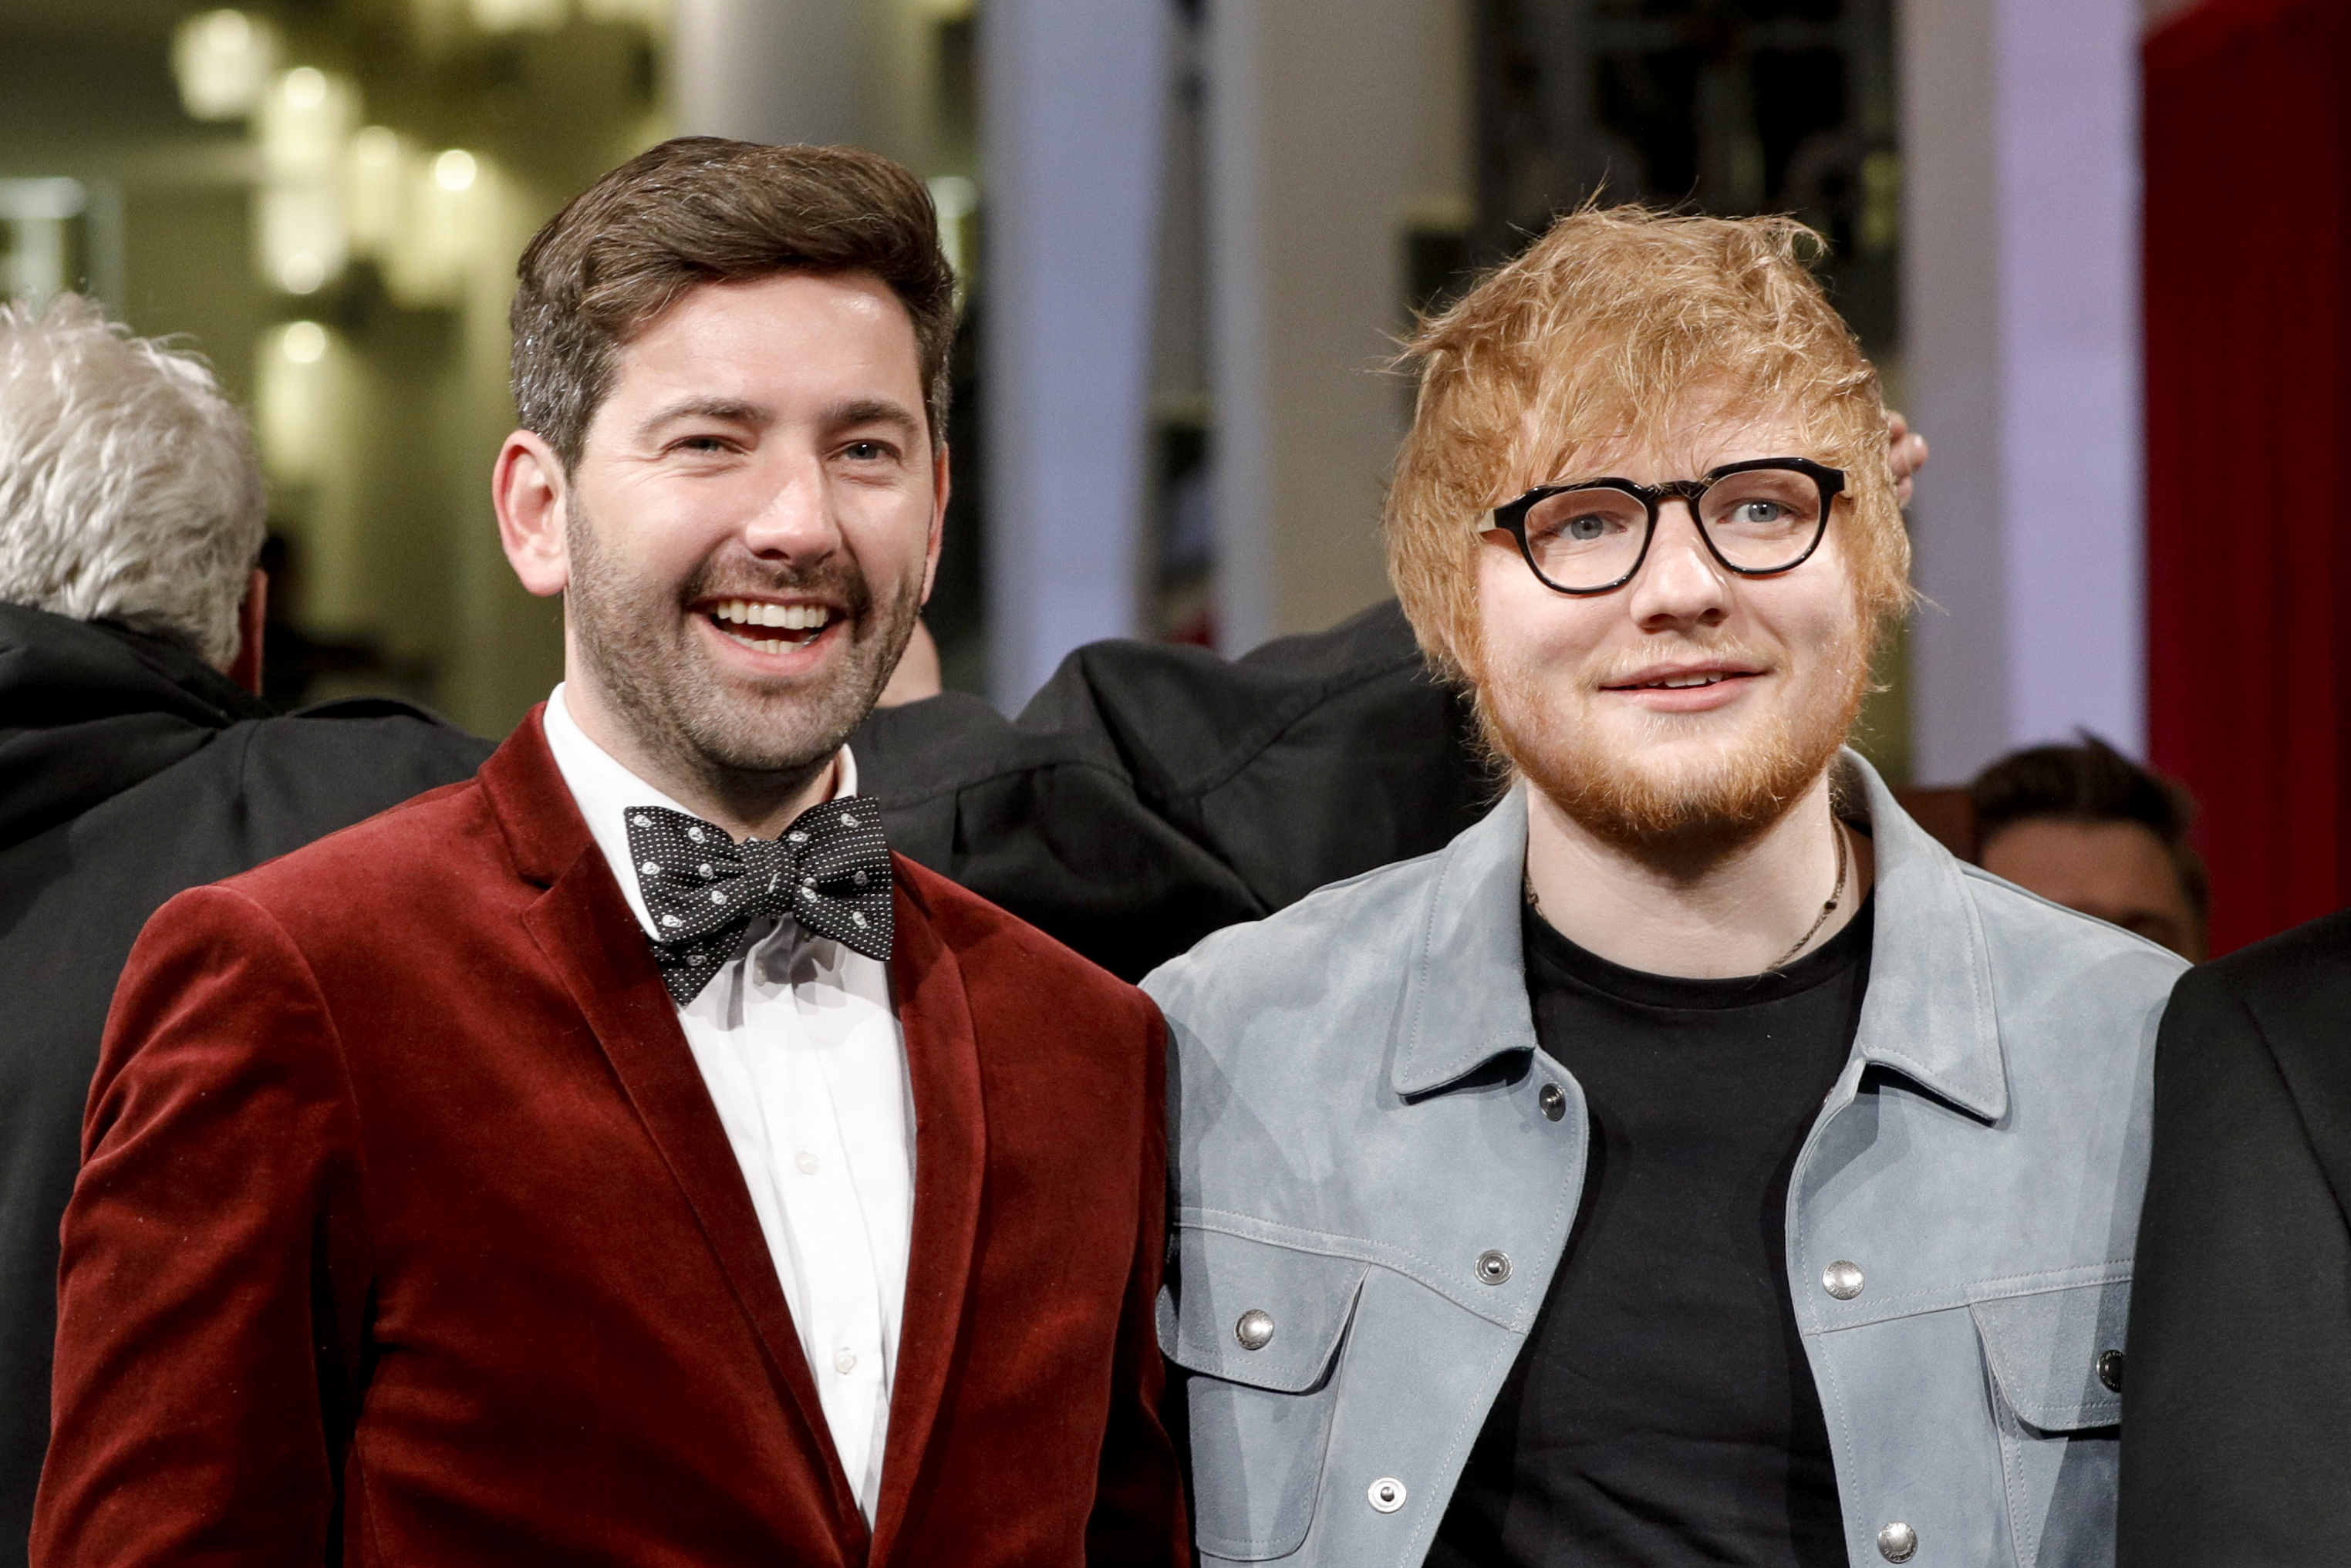 Director Murray Cummings and singer-songwriter Ed Sheeran attend the 'Songwriter' premiere during the 68th Berlinale International Film Festival Berlin on February 23, 2018. (Isa Foltin—Getty Images)